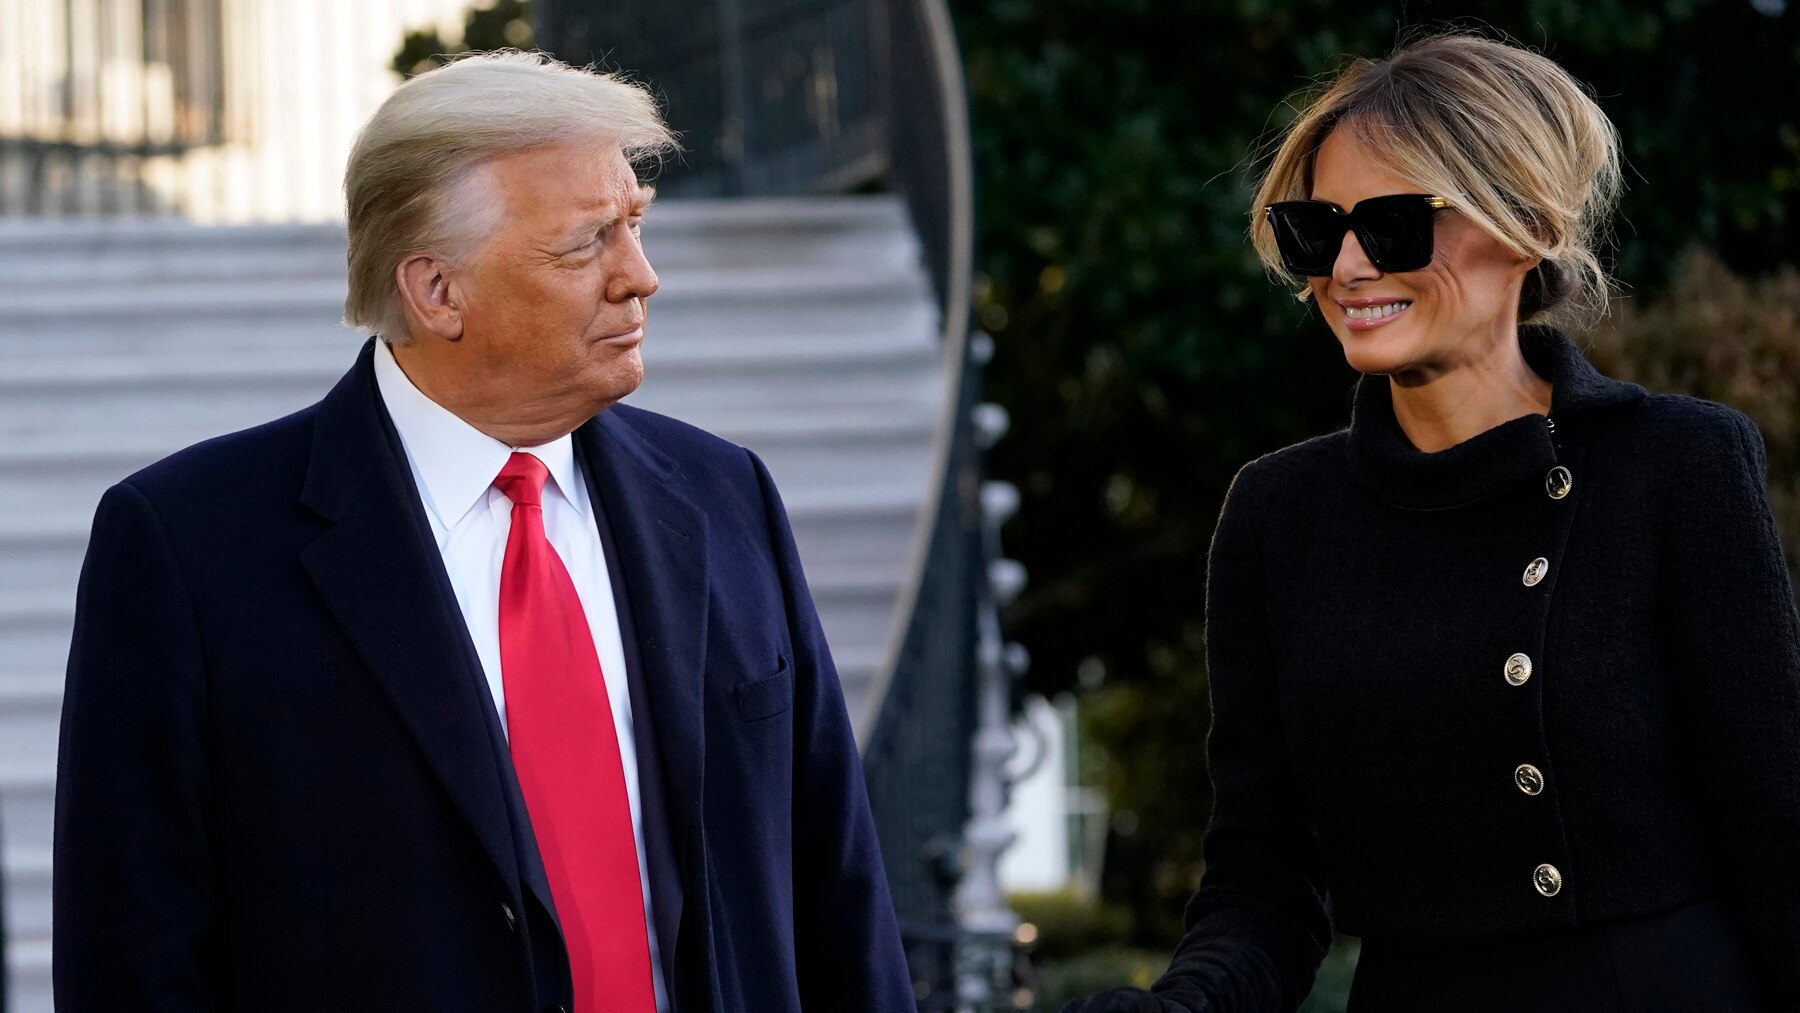 Back to the White House?  Melania Trump: 'Never say never'